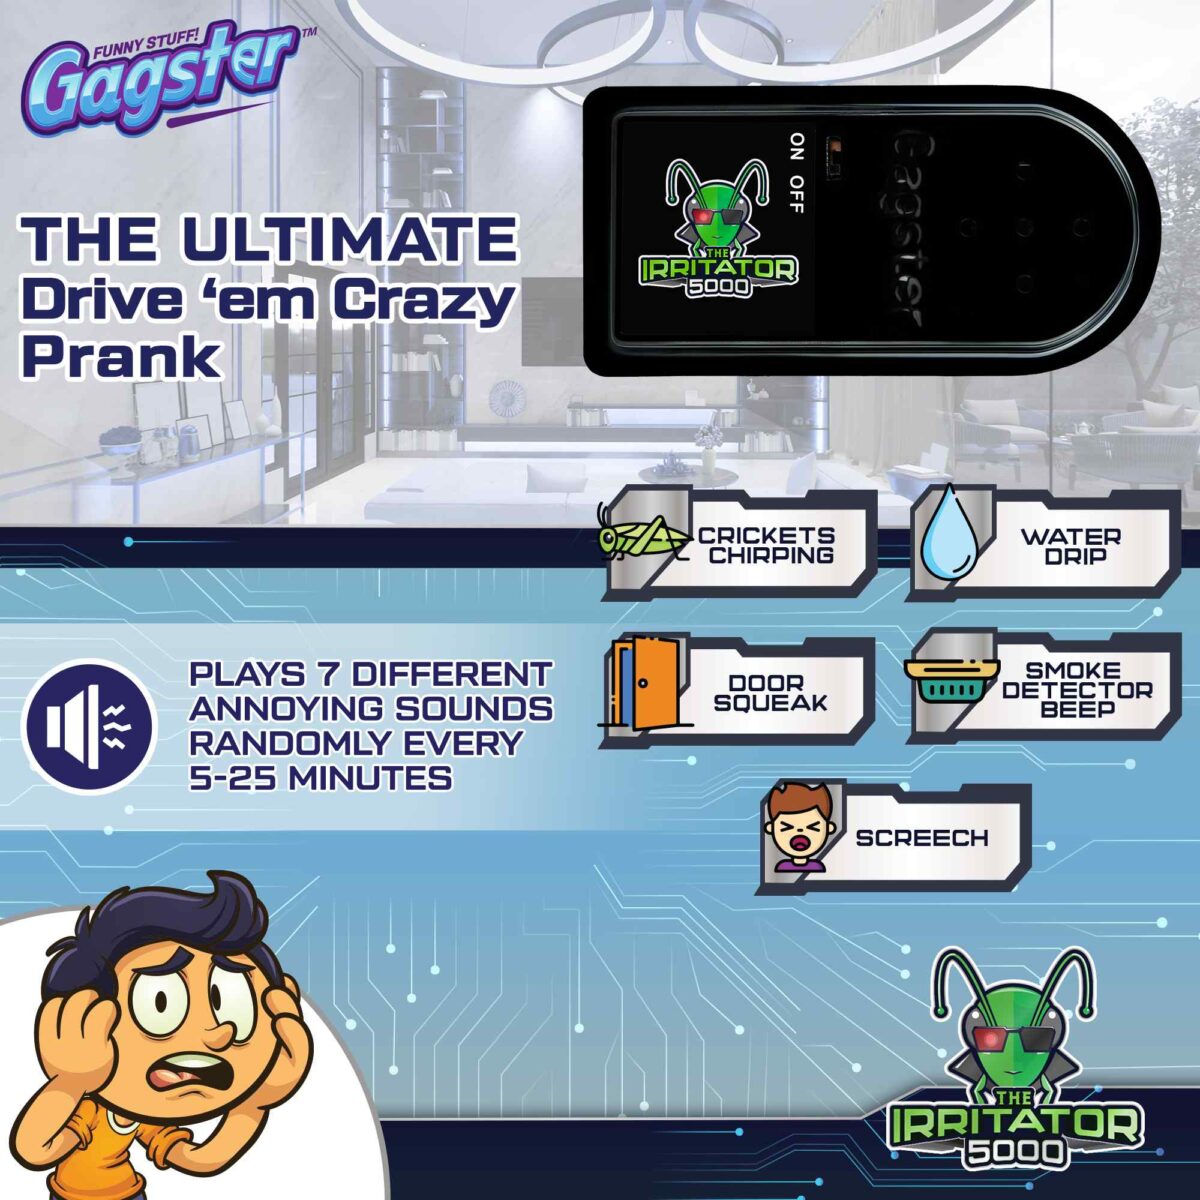 "gagster products The Irritator 5000 ultimate cricket noise prank noisemaker PCB torture device small beeping device annoying pcb beeping prank device annoyingpcb - the prank device that won’t stop beeping for 3 years how to find annoying pcb hidden annoying noise maker annoying pcb amazon annoying pcb instructions annoying pcb beeper annoying pcb mini"